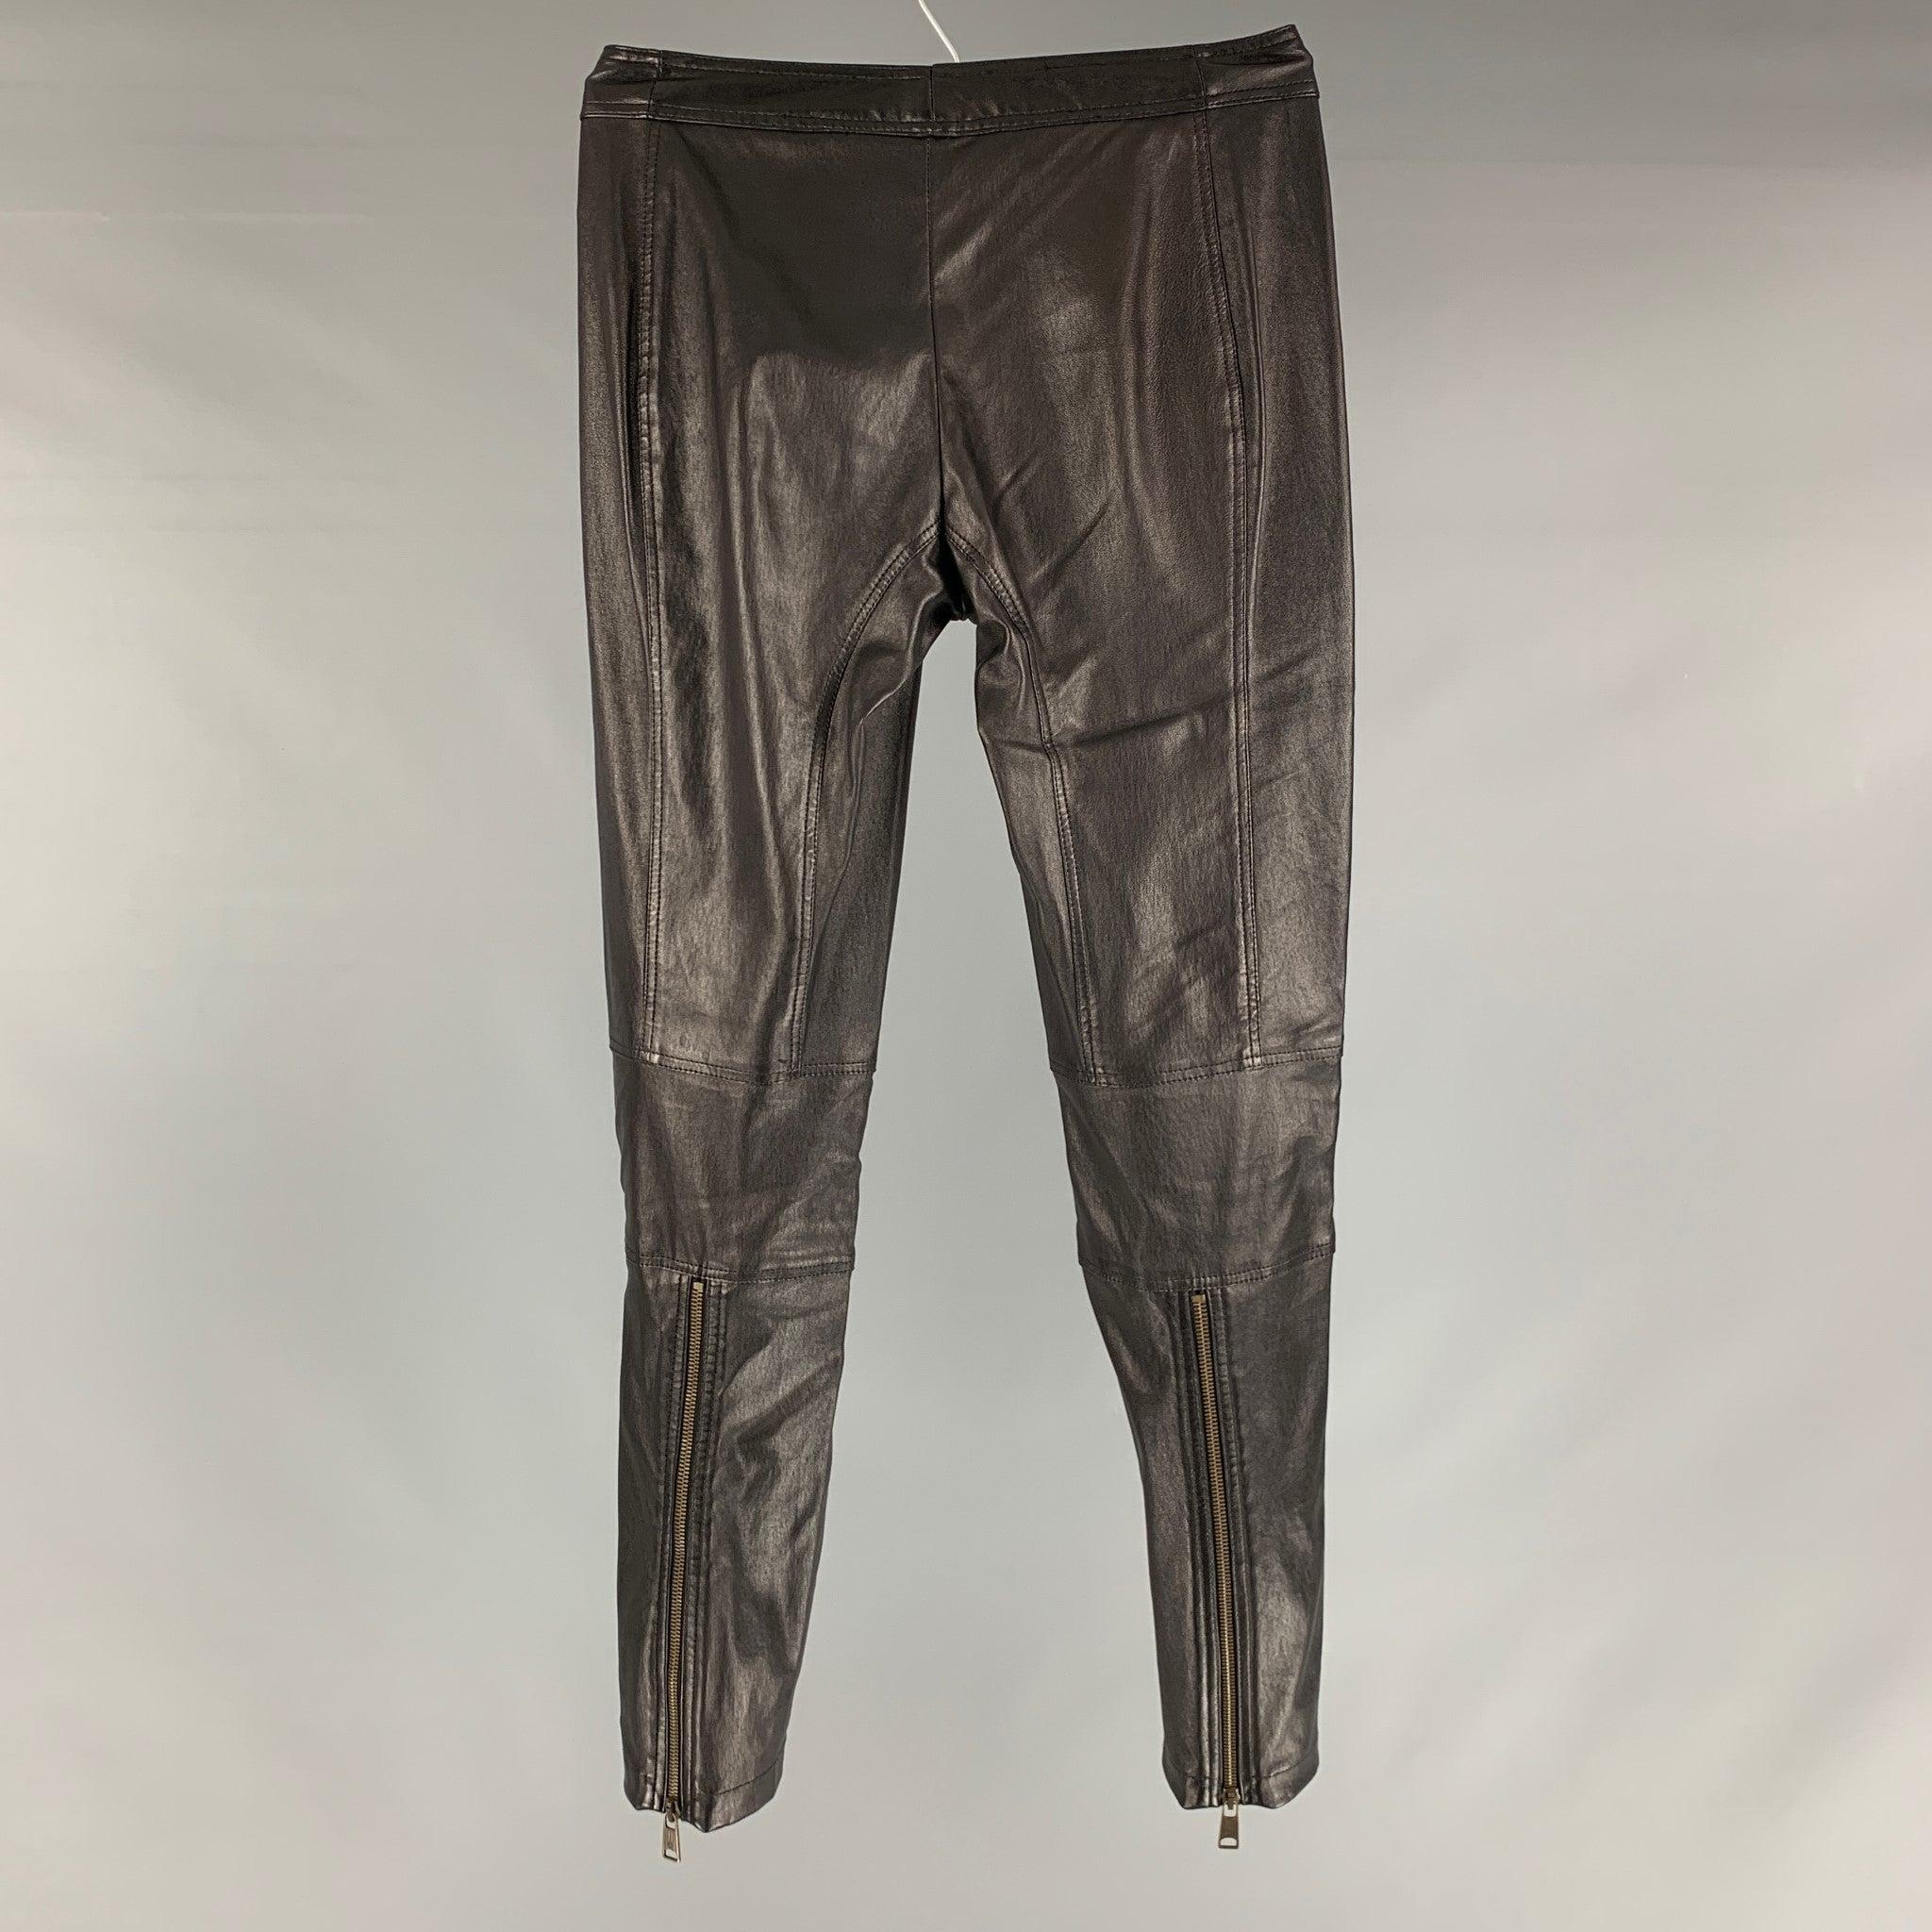 ALEXANDER MCQUEEN pants comes in a black leather material featuring cropped style, low waist, skinny fit, zipper pockets, and a zip fly closure. Please check measurements. Made in Italy.Excellent Pre-Owned Condition. 

Marked:   no size marked